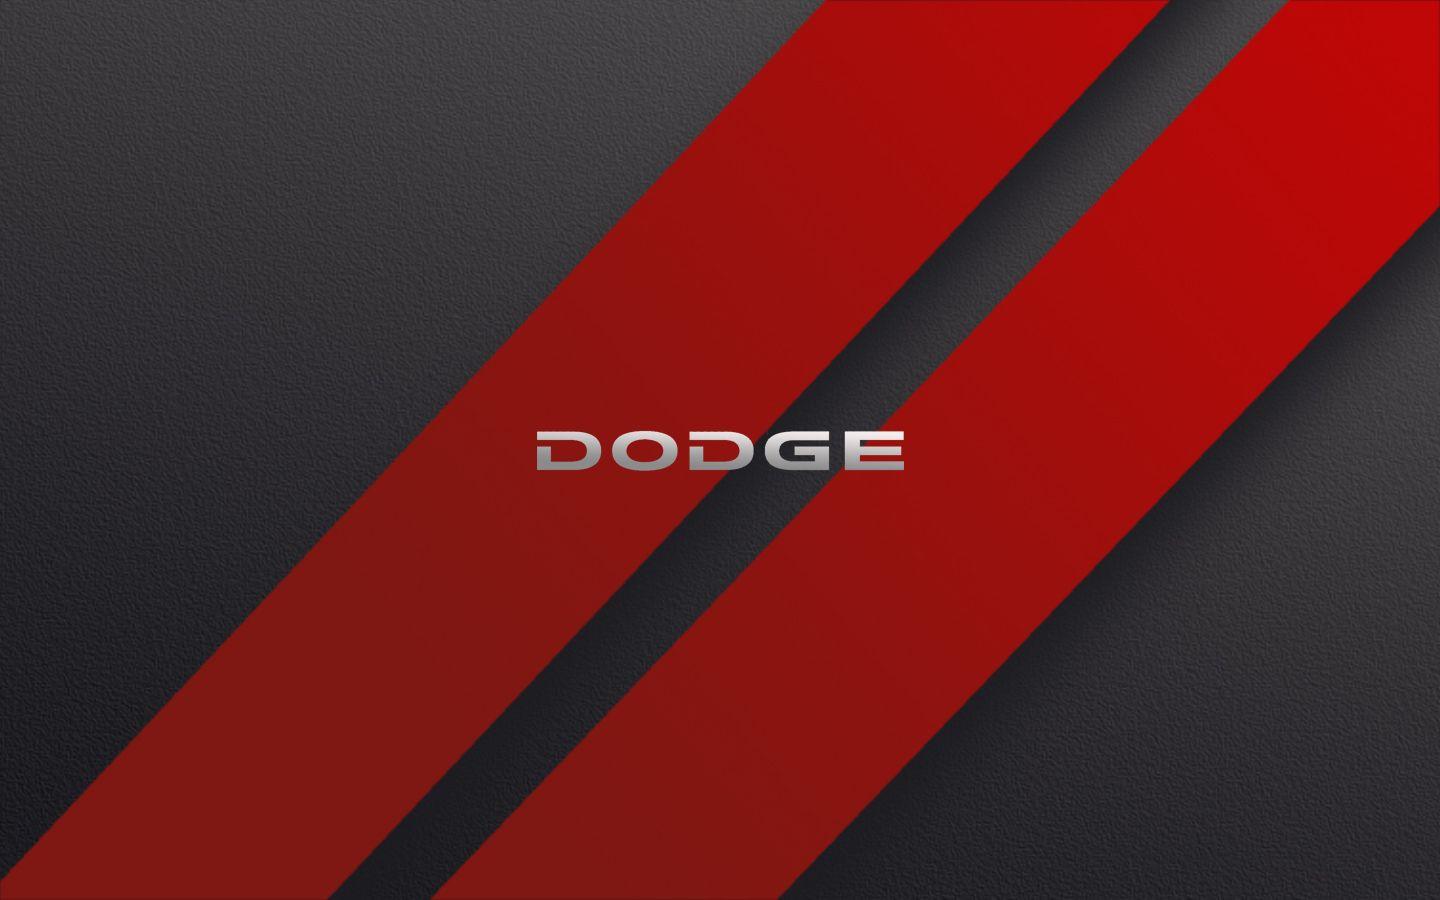 Two Red Rhombus Logo - Dodge Logo, Dodge Car Symbol Meaning and History | Car Brand Names.com